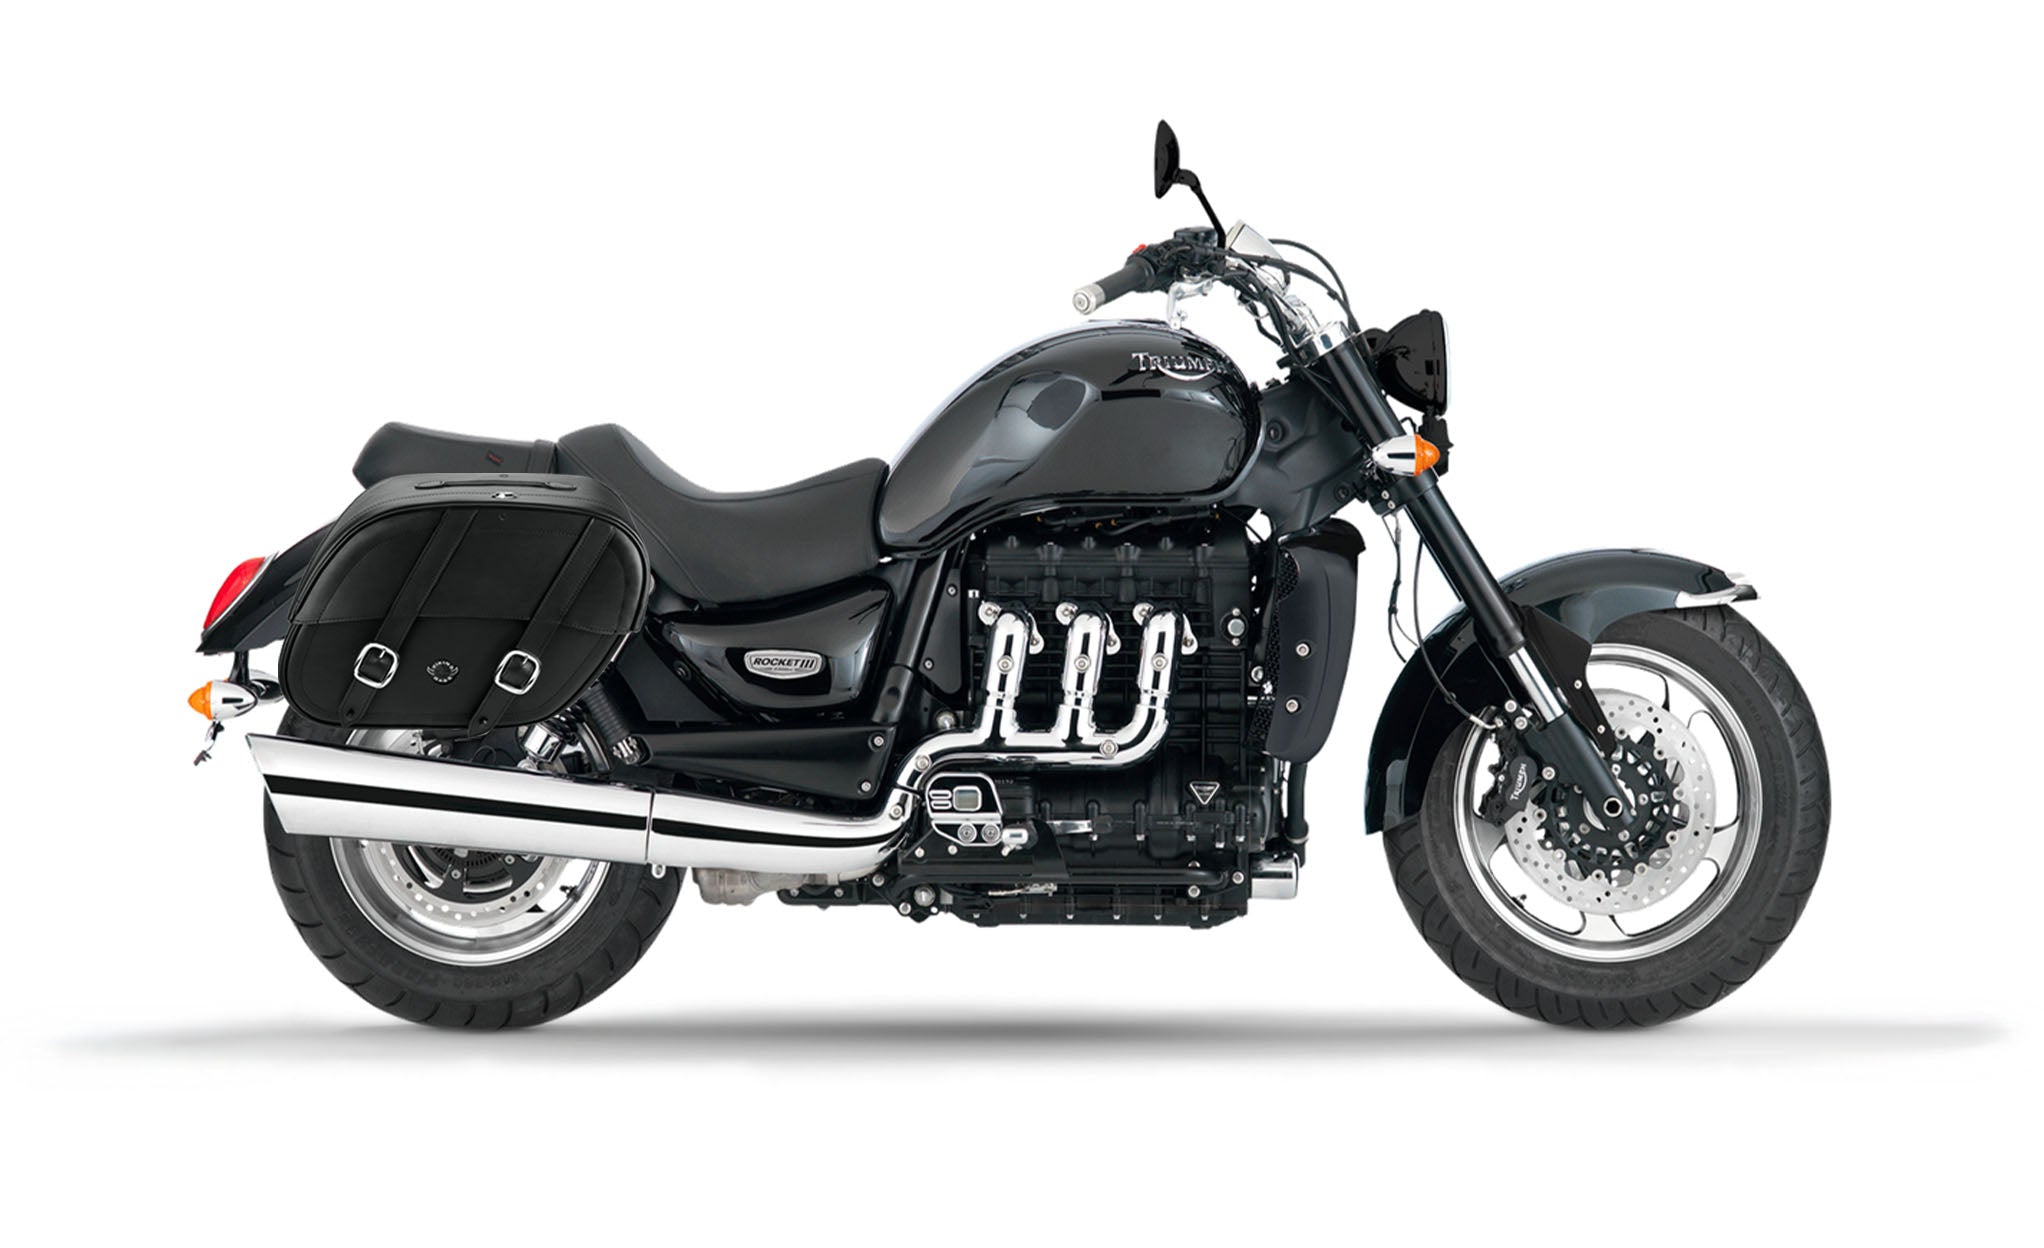 Viking Club Large Triumph Rocket Iii Roadster Shock Cut Out Leather Motorcycle Saddlebags on Bike Photo @expand